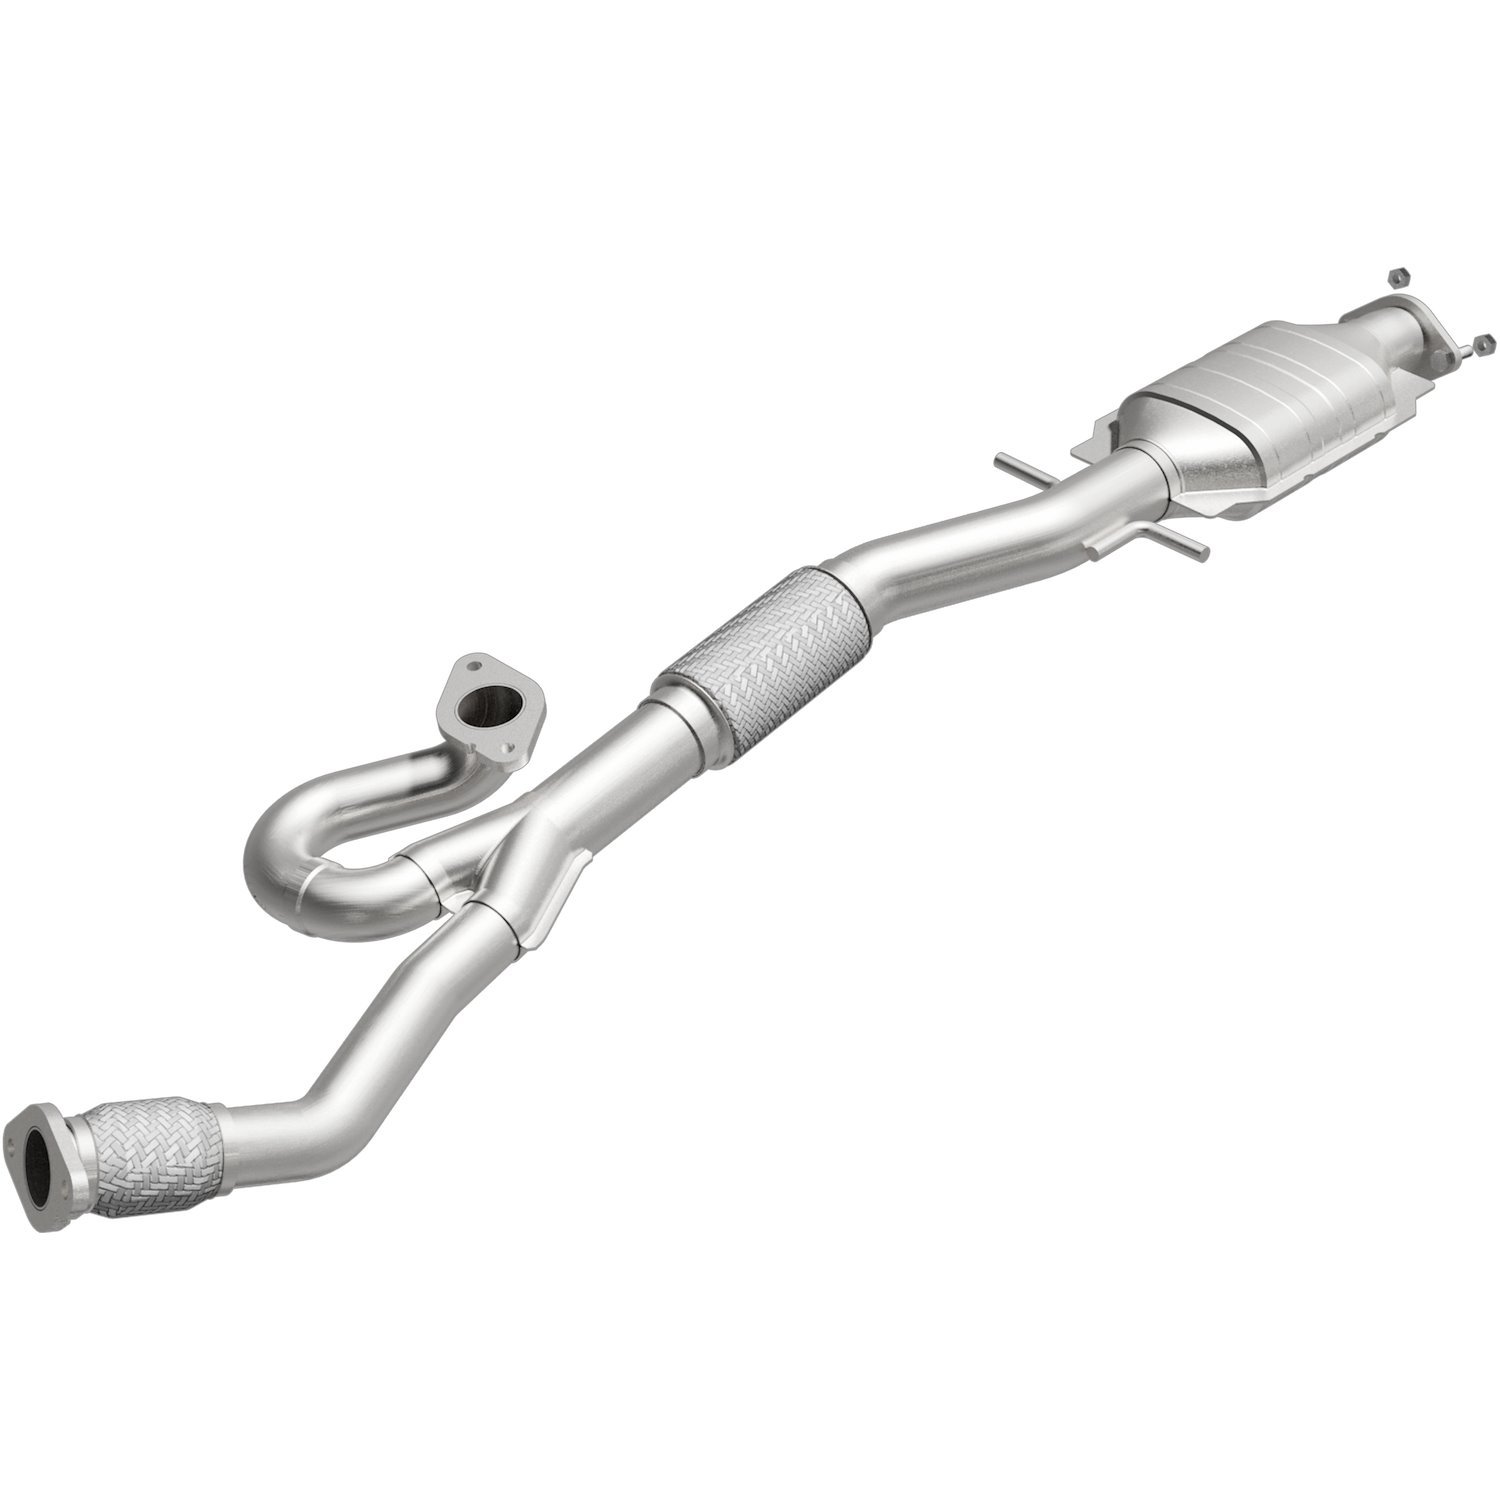 OEM Grade Federal / EPA Compliant Direct-Fit Catalytic Converter 52417